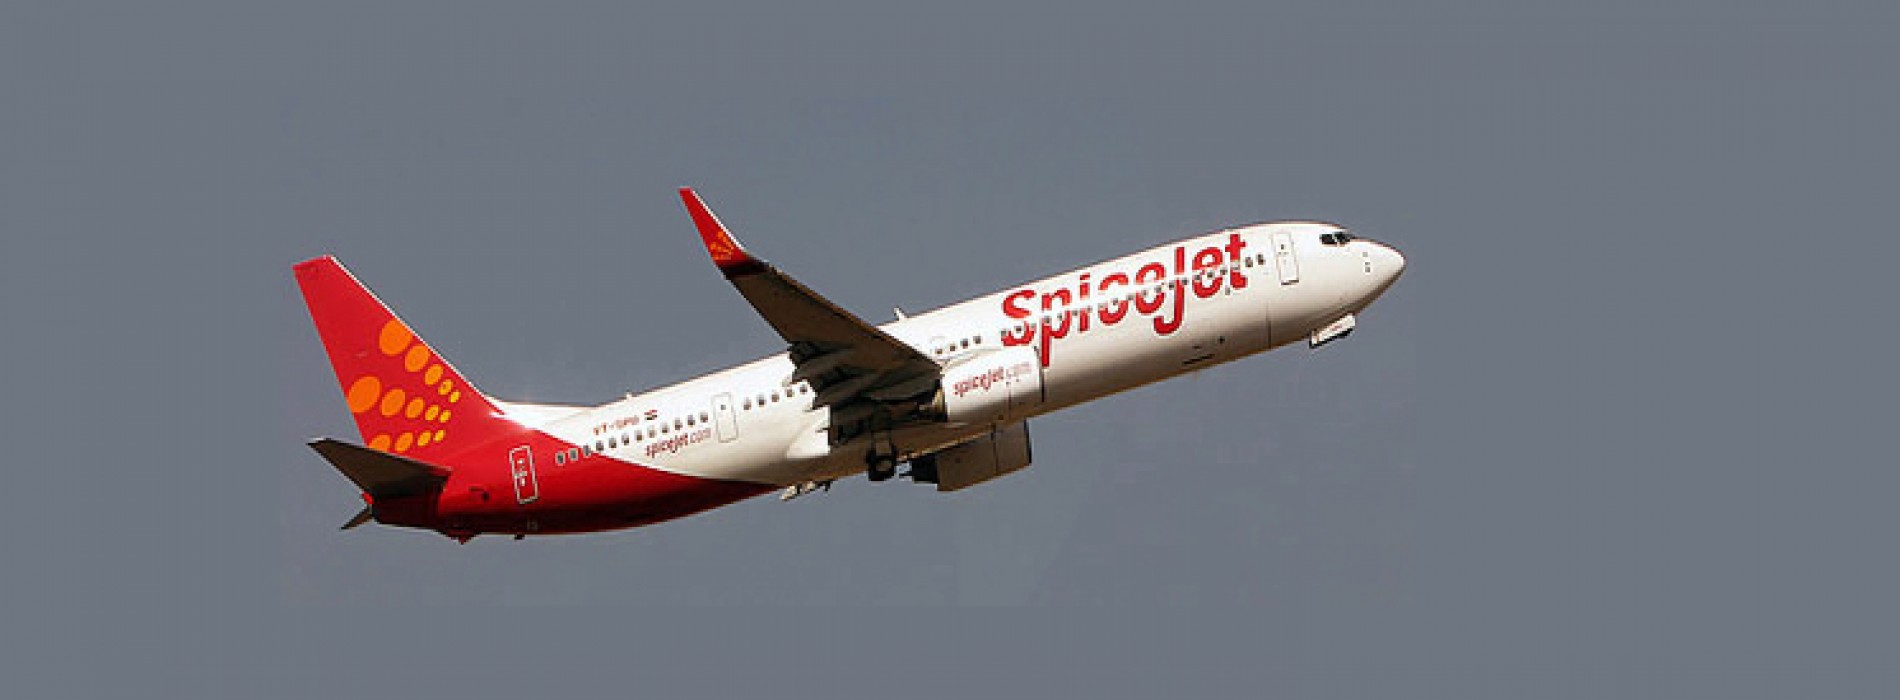 SpiceJet hires extra staff, ties up with hotels in its fog readiness plan